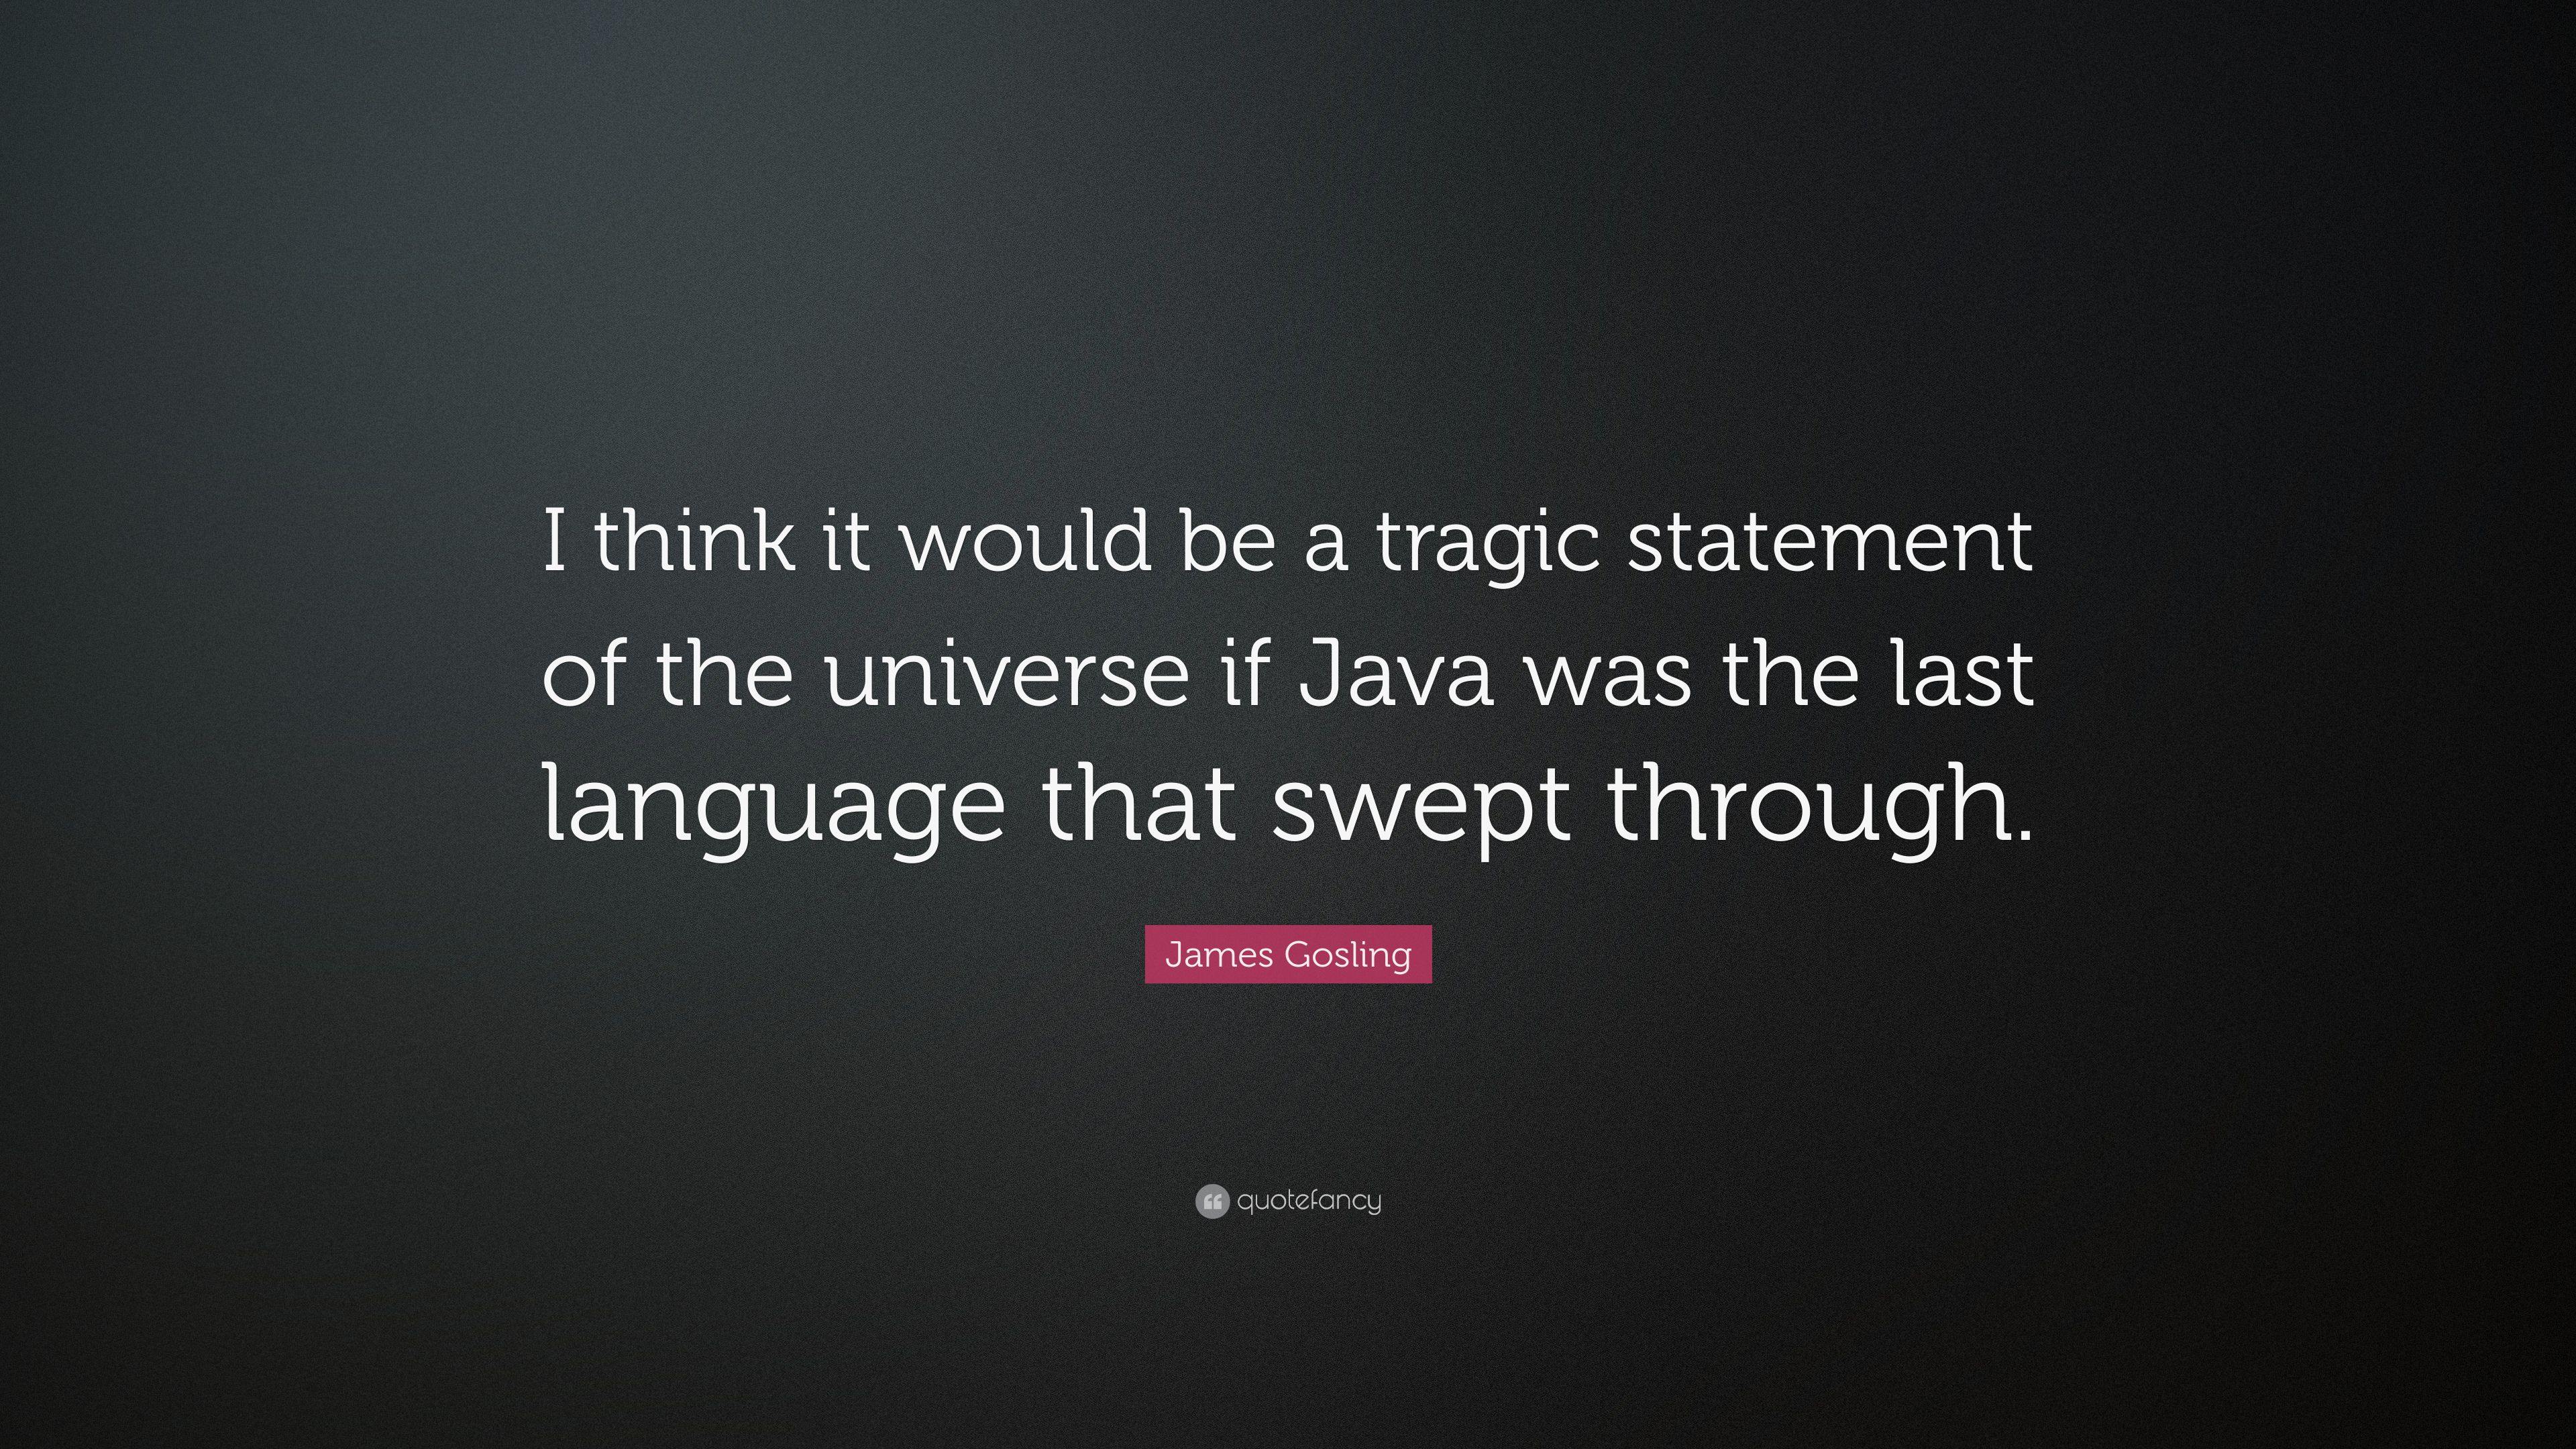 James Gosling Quote: “I think it would be a tragic statement